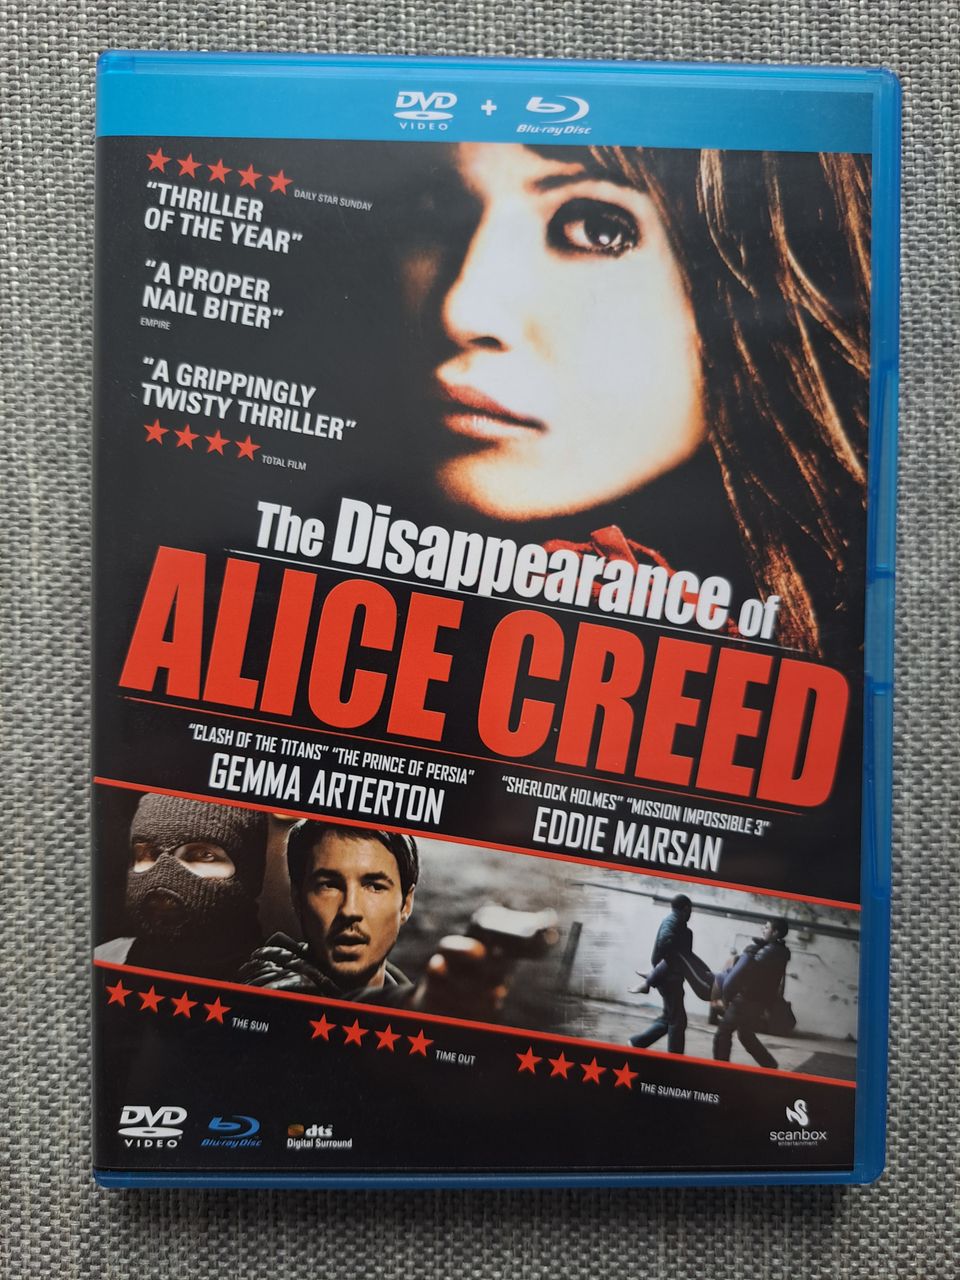 The Disappearance of Alice Creed (Bluray + dvd)